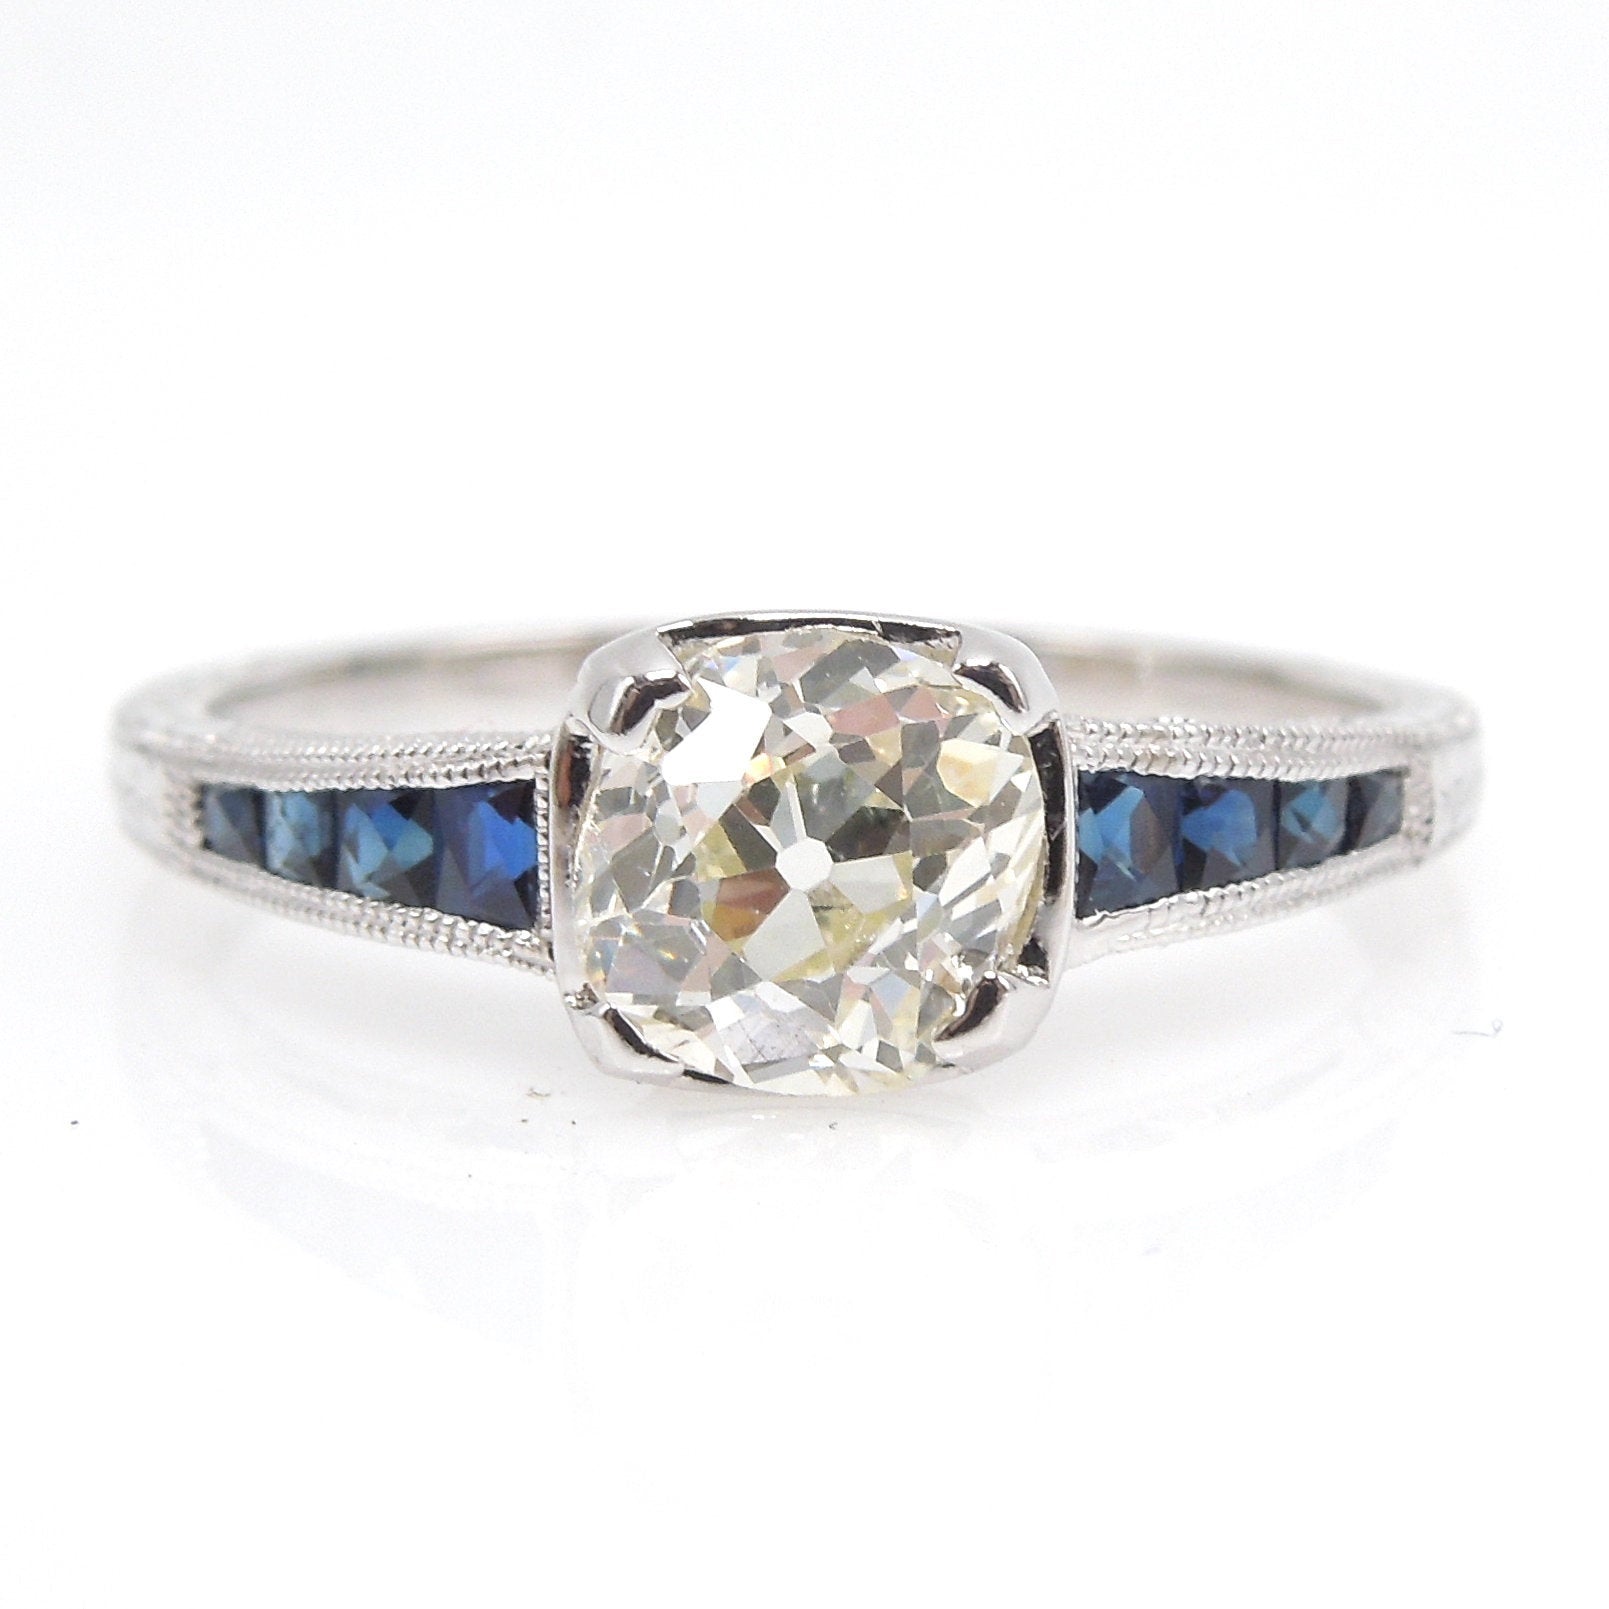 0.93ct Old Mine Cut in Art Deco Style Engagement Ring with French Cut Sapphires - White Gold